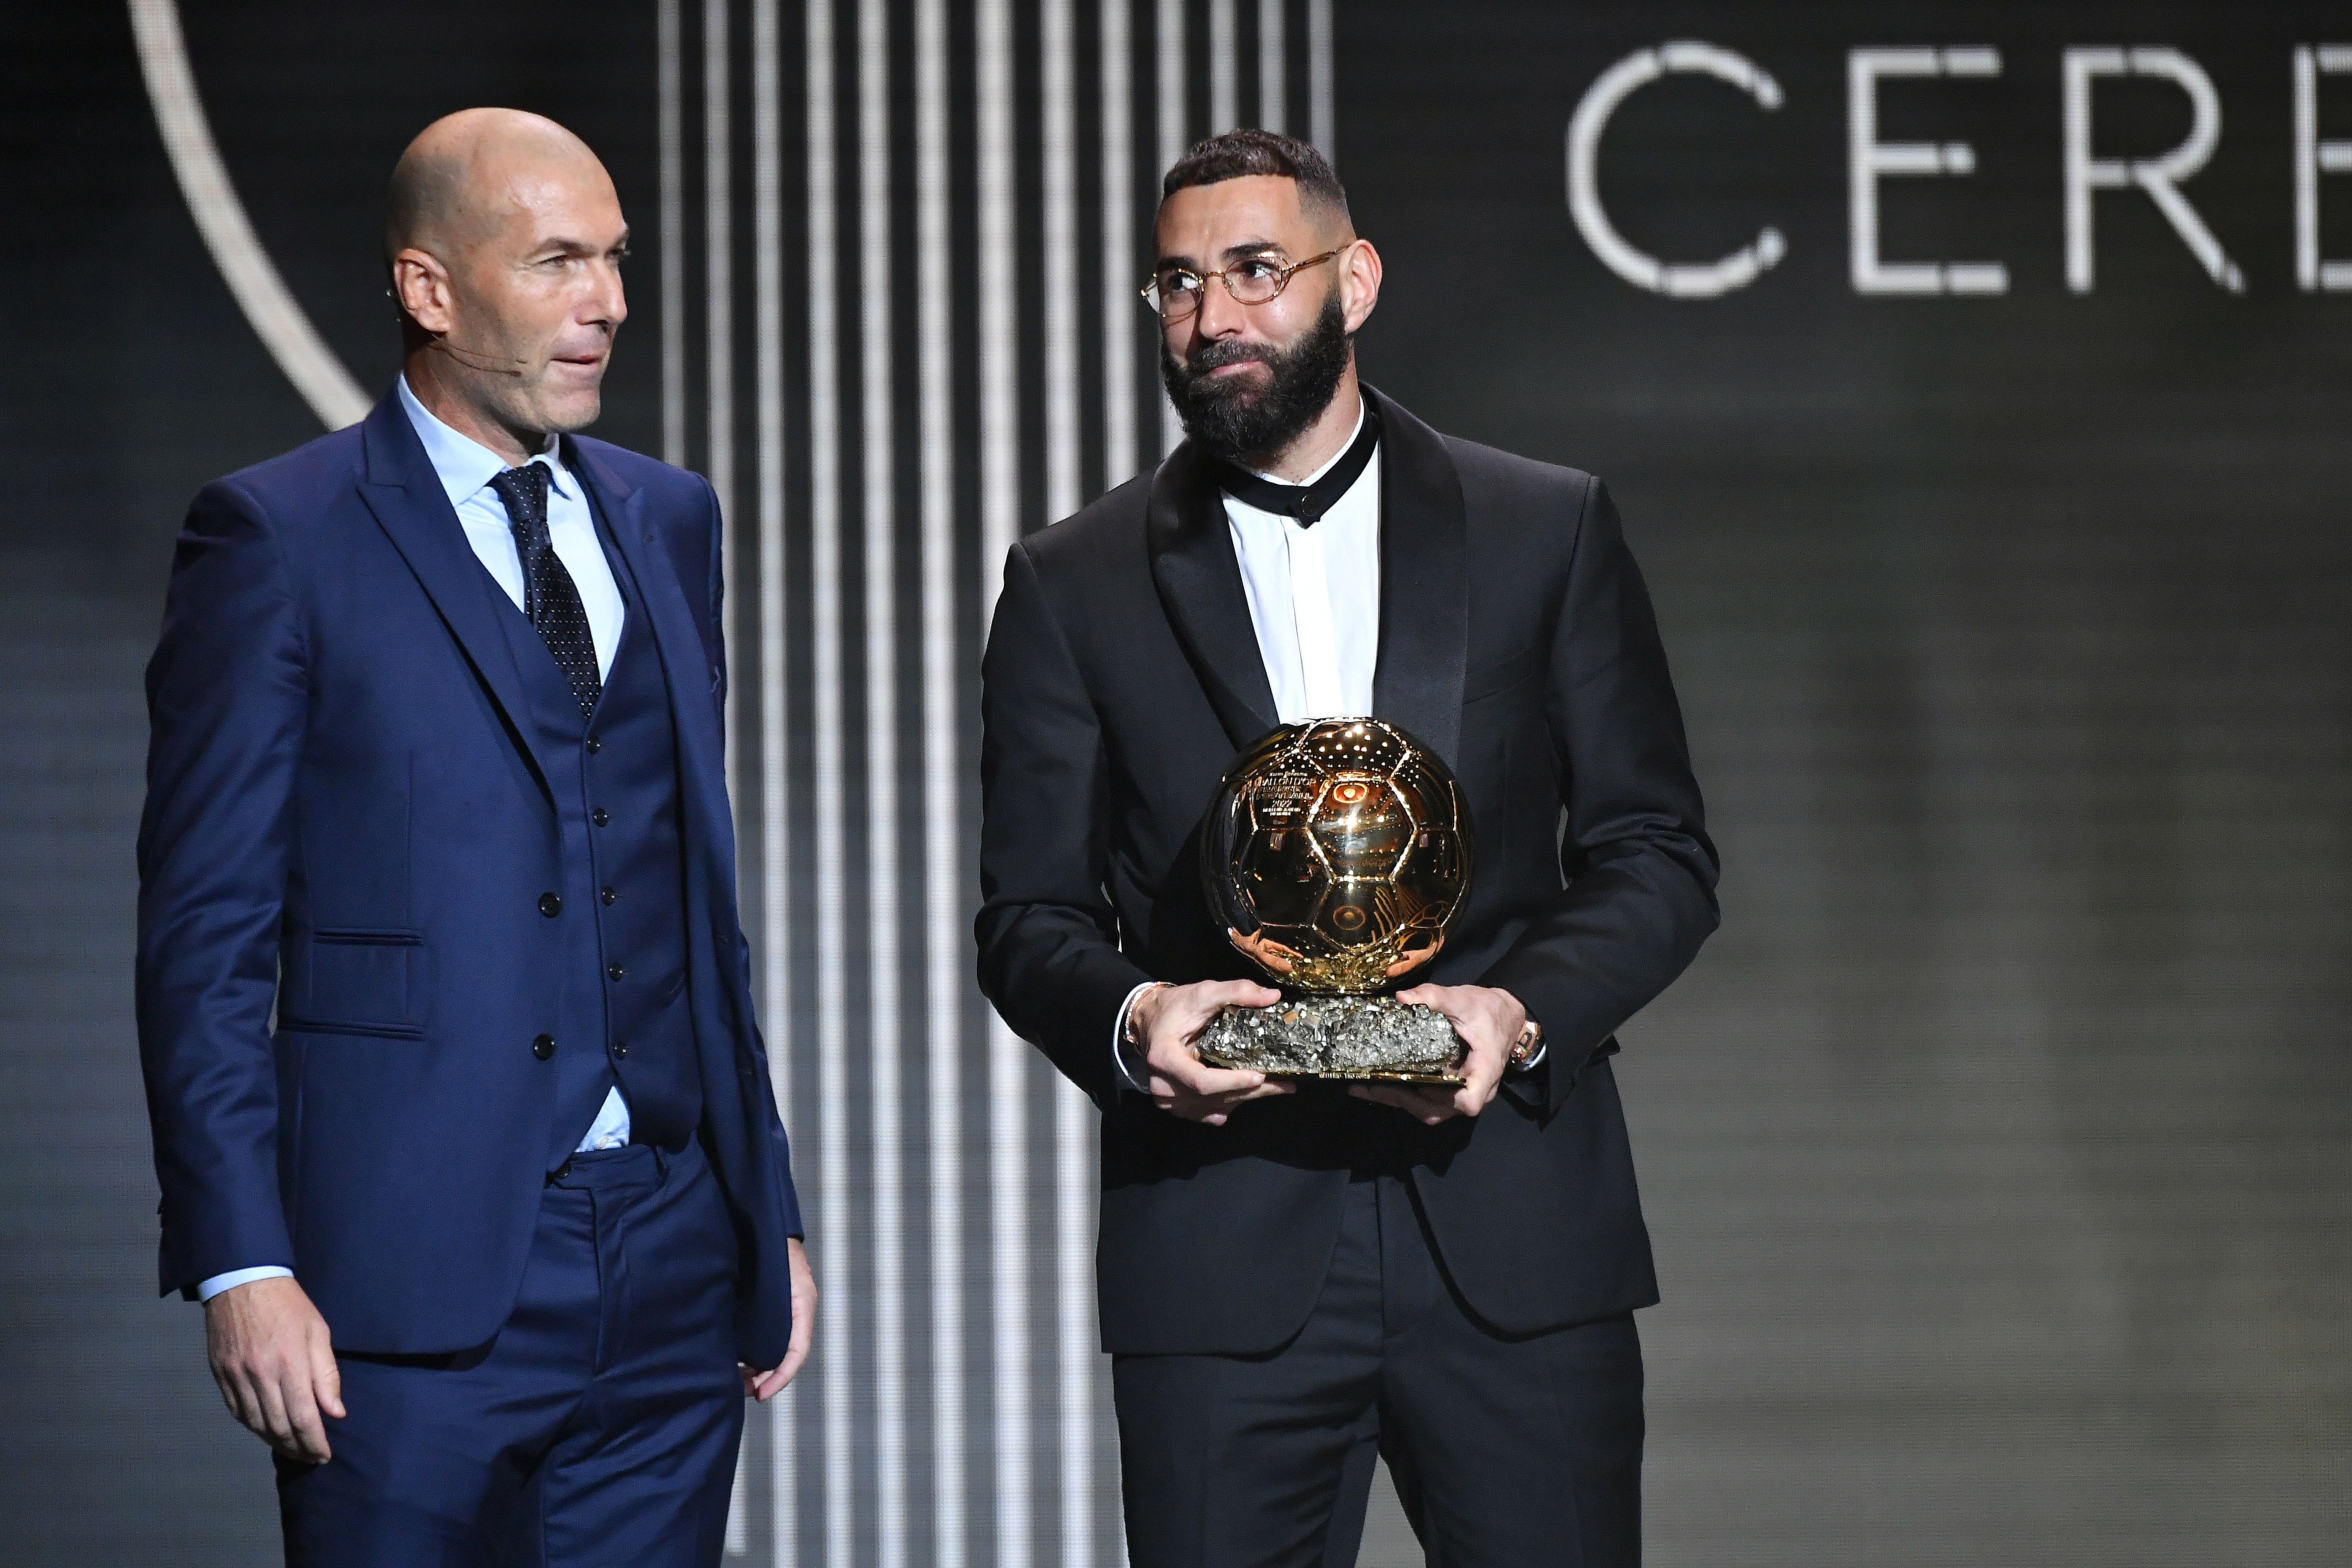 Karim Benzema (R) receives the Ballon d'Or award from Zinedine Zidane (L) during the Ballon D'Or ceremony at Theatre Du Chatelet In Paris on October 17, 2022 in Paris, France